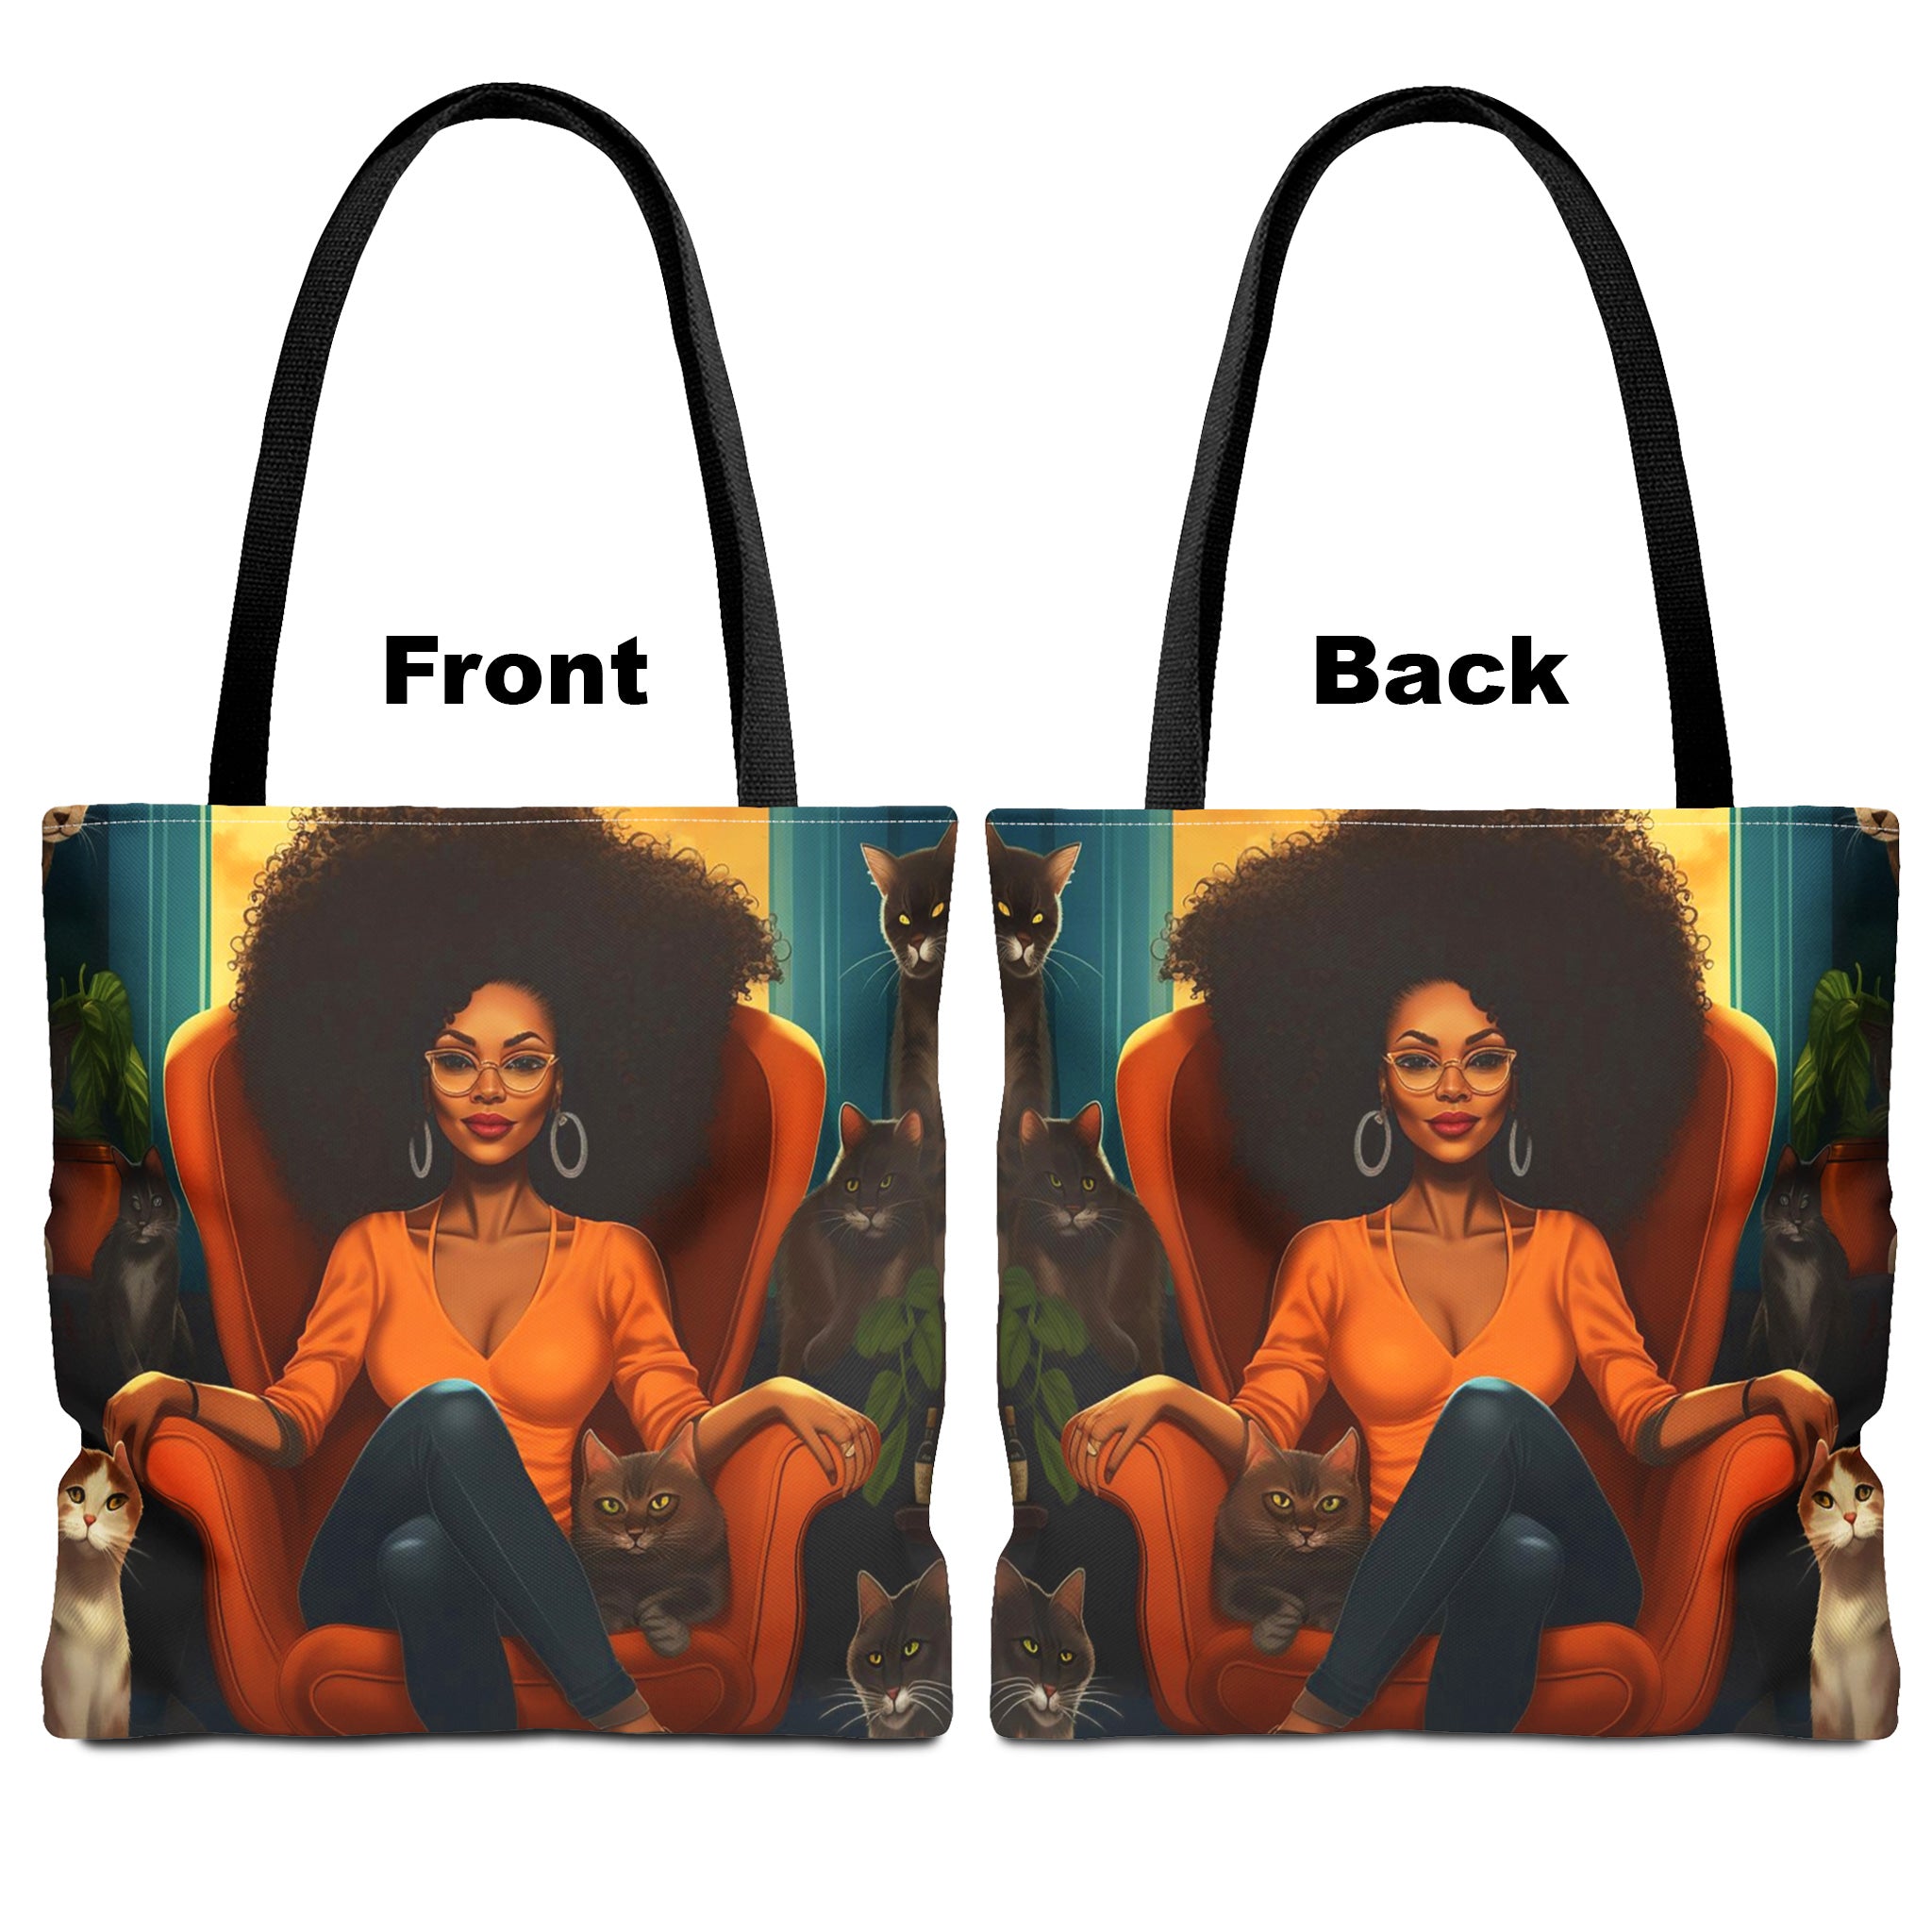 Black Lady Cat Mama Tote Bag - front and back views.